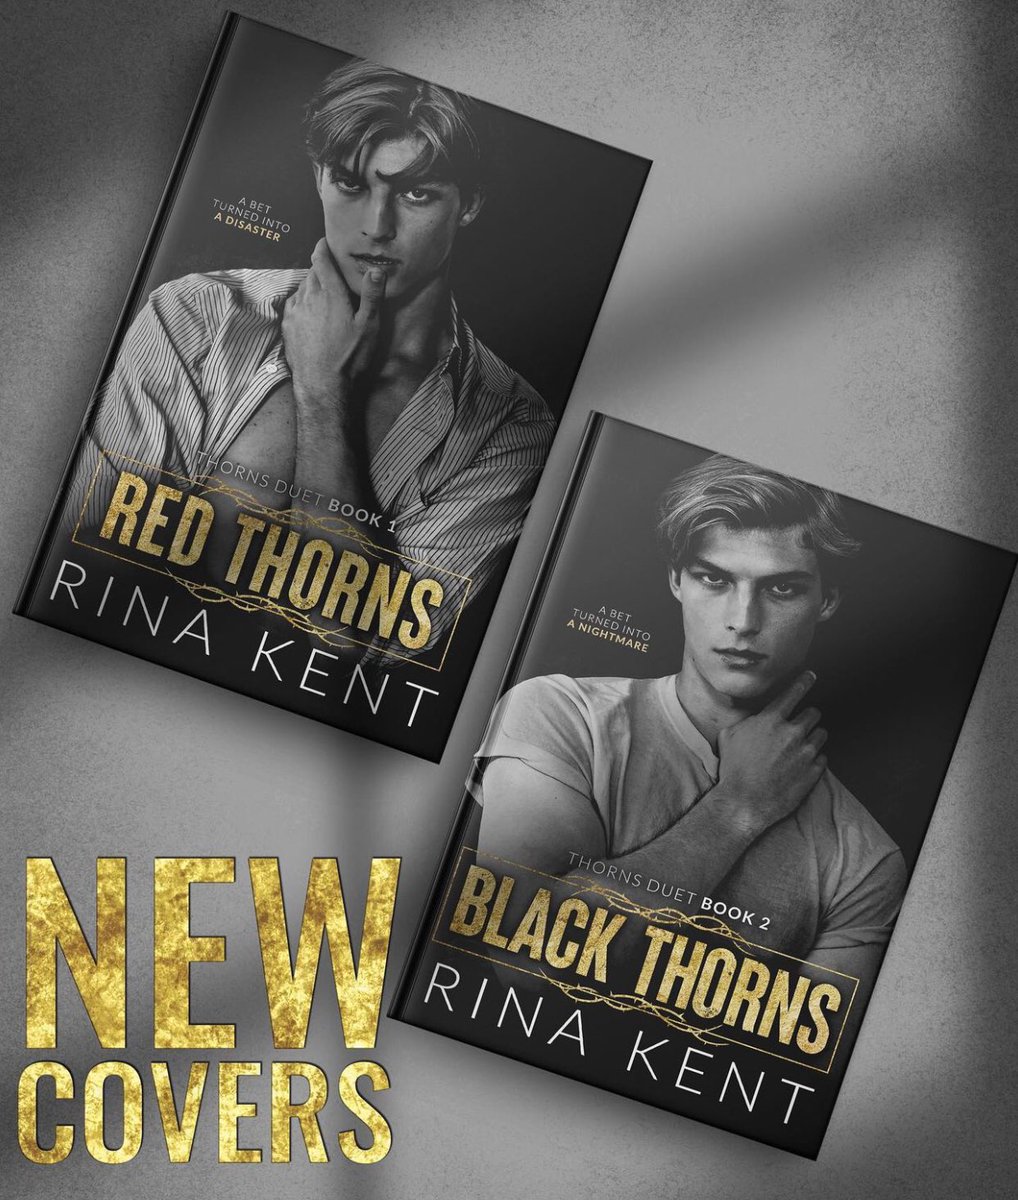 RK just posted new covers for Thorns duet!